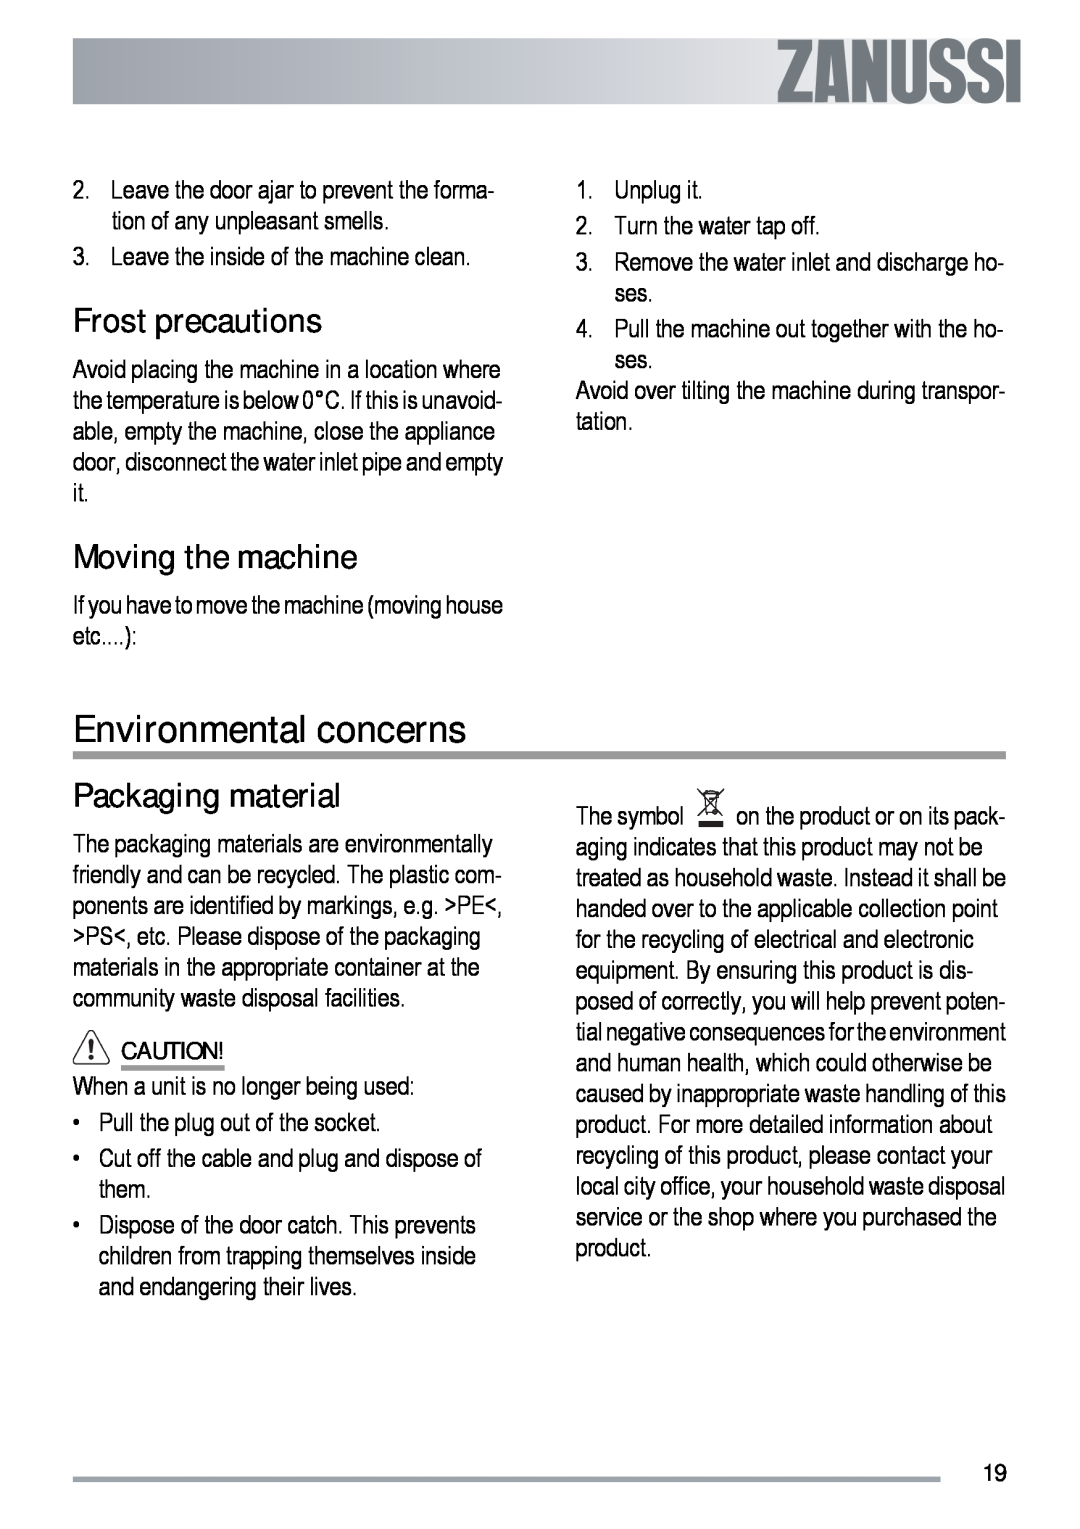 Zanussi ZDT 6454 user manual Environmental concerns, Frost precautions, Moving the machine, Packaging material 